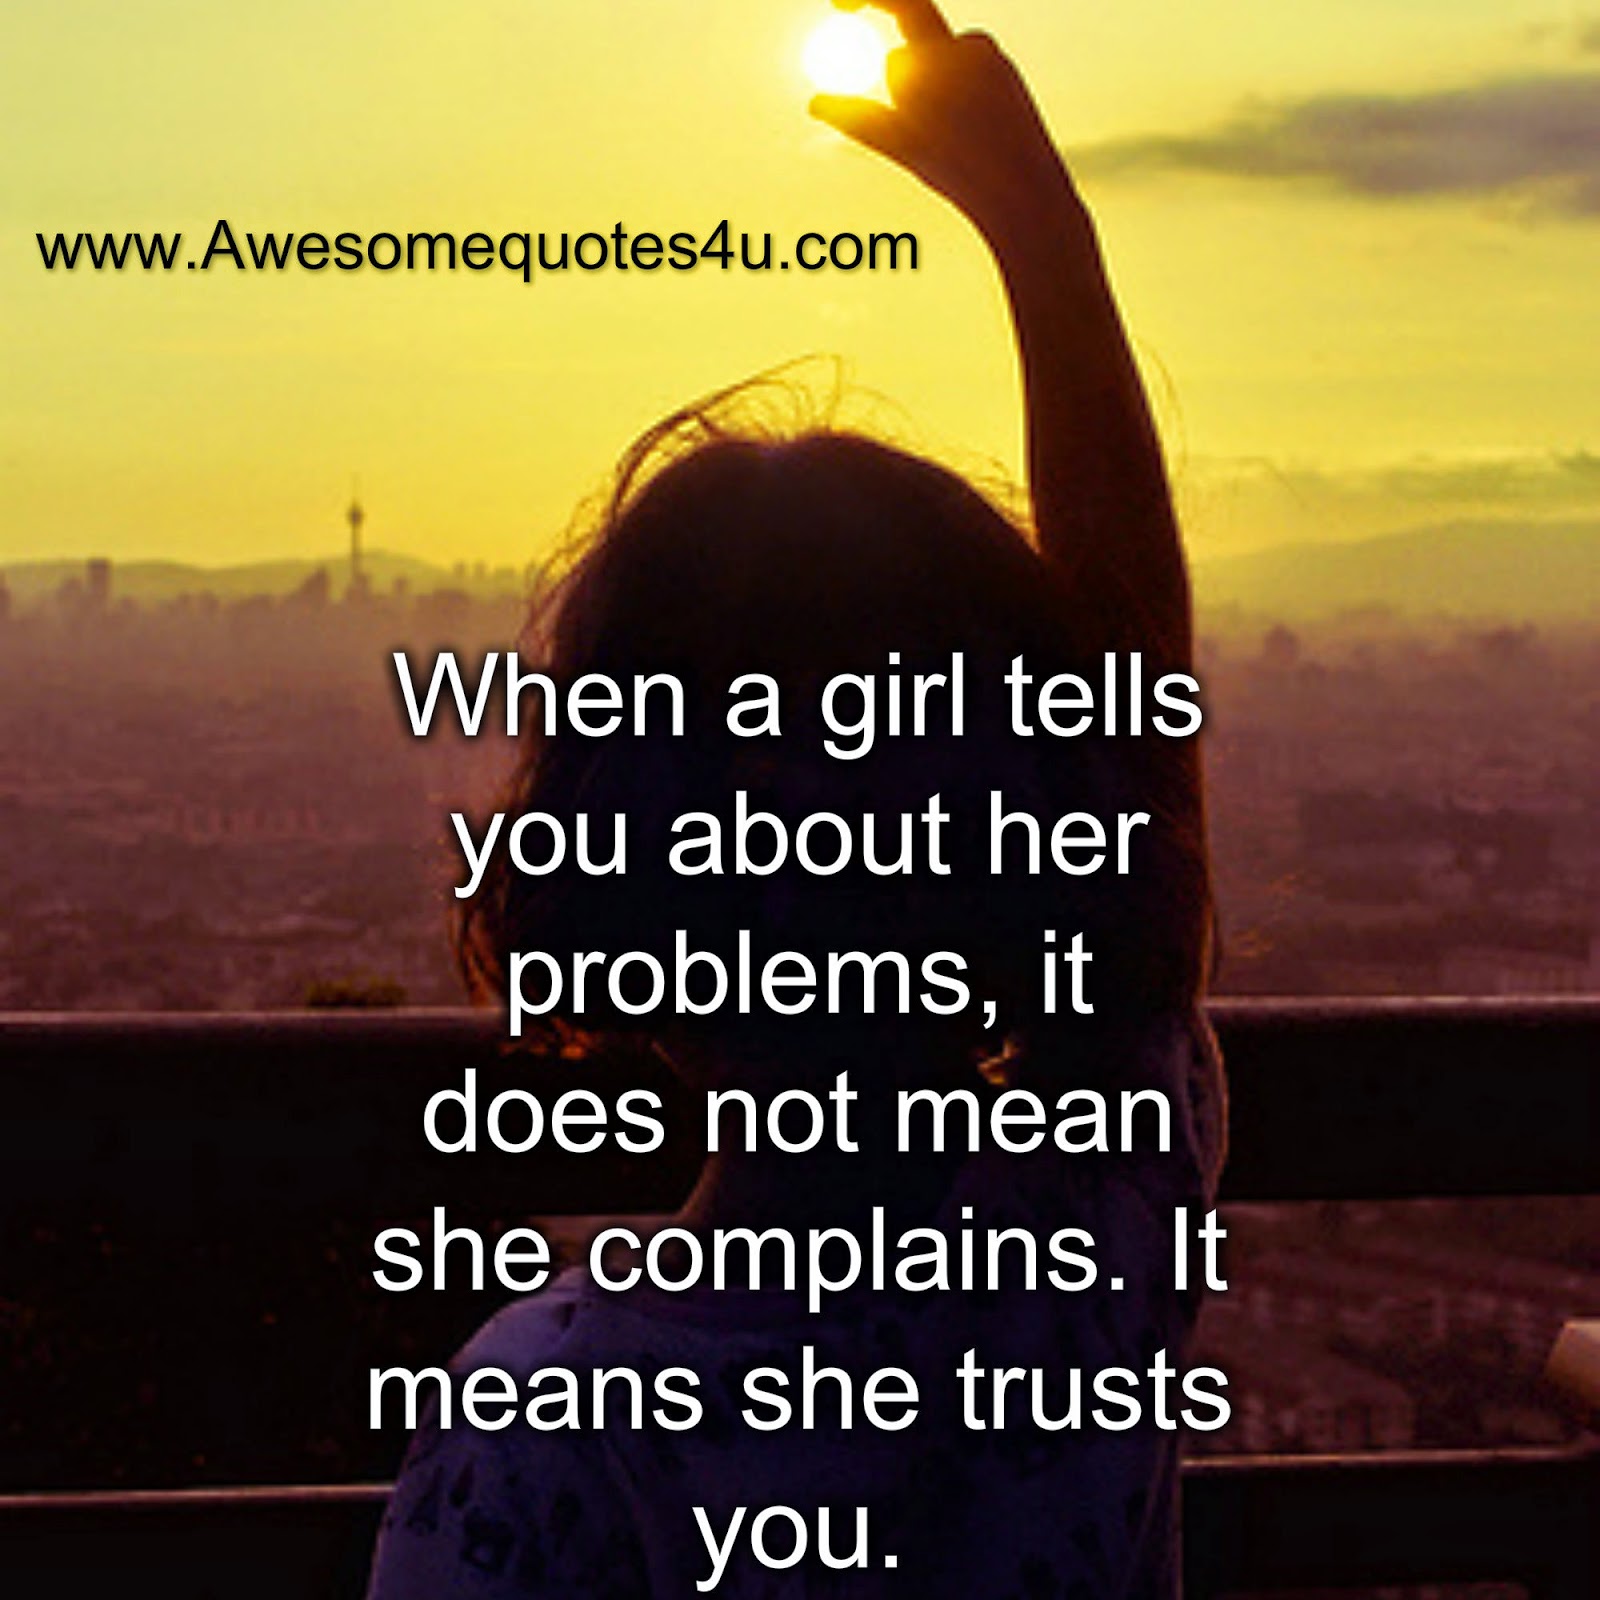 Awesome Quotes: When a girl tells you about her problems